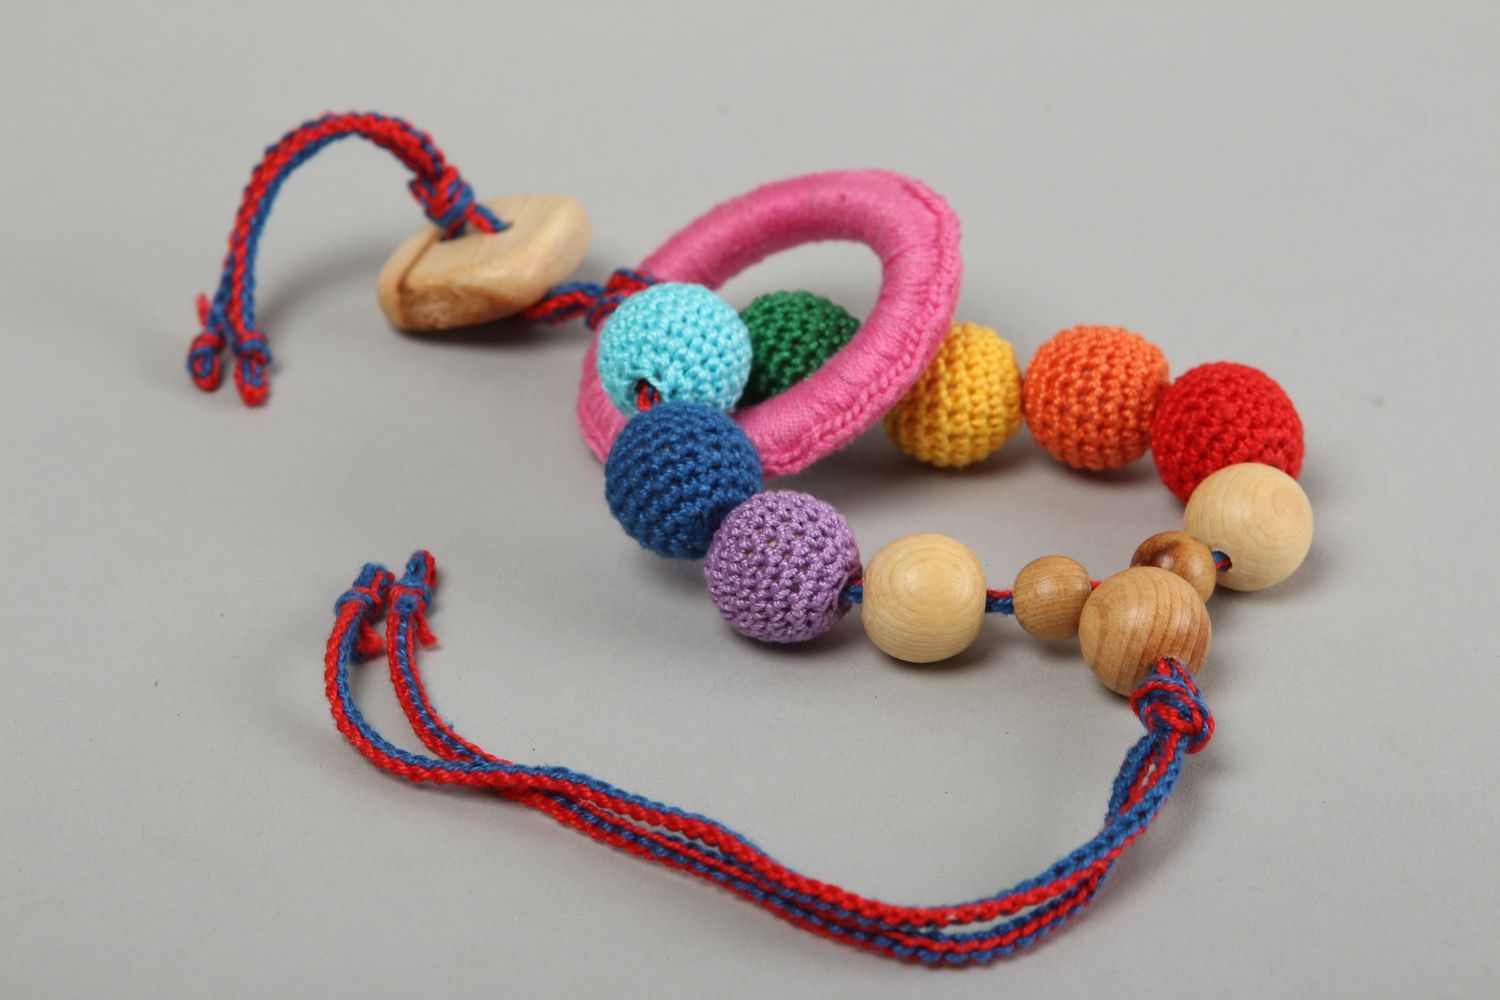 Handmade wooden teething toy childrens toys baby toys crochet ideas small gifts photo 2